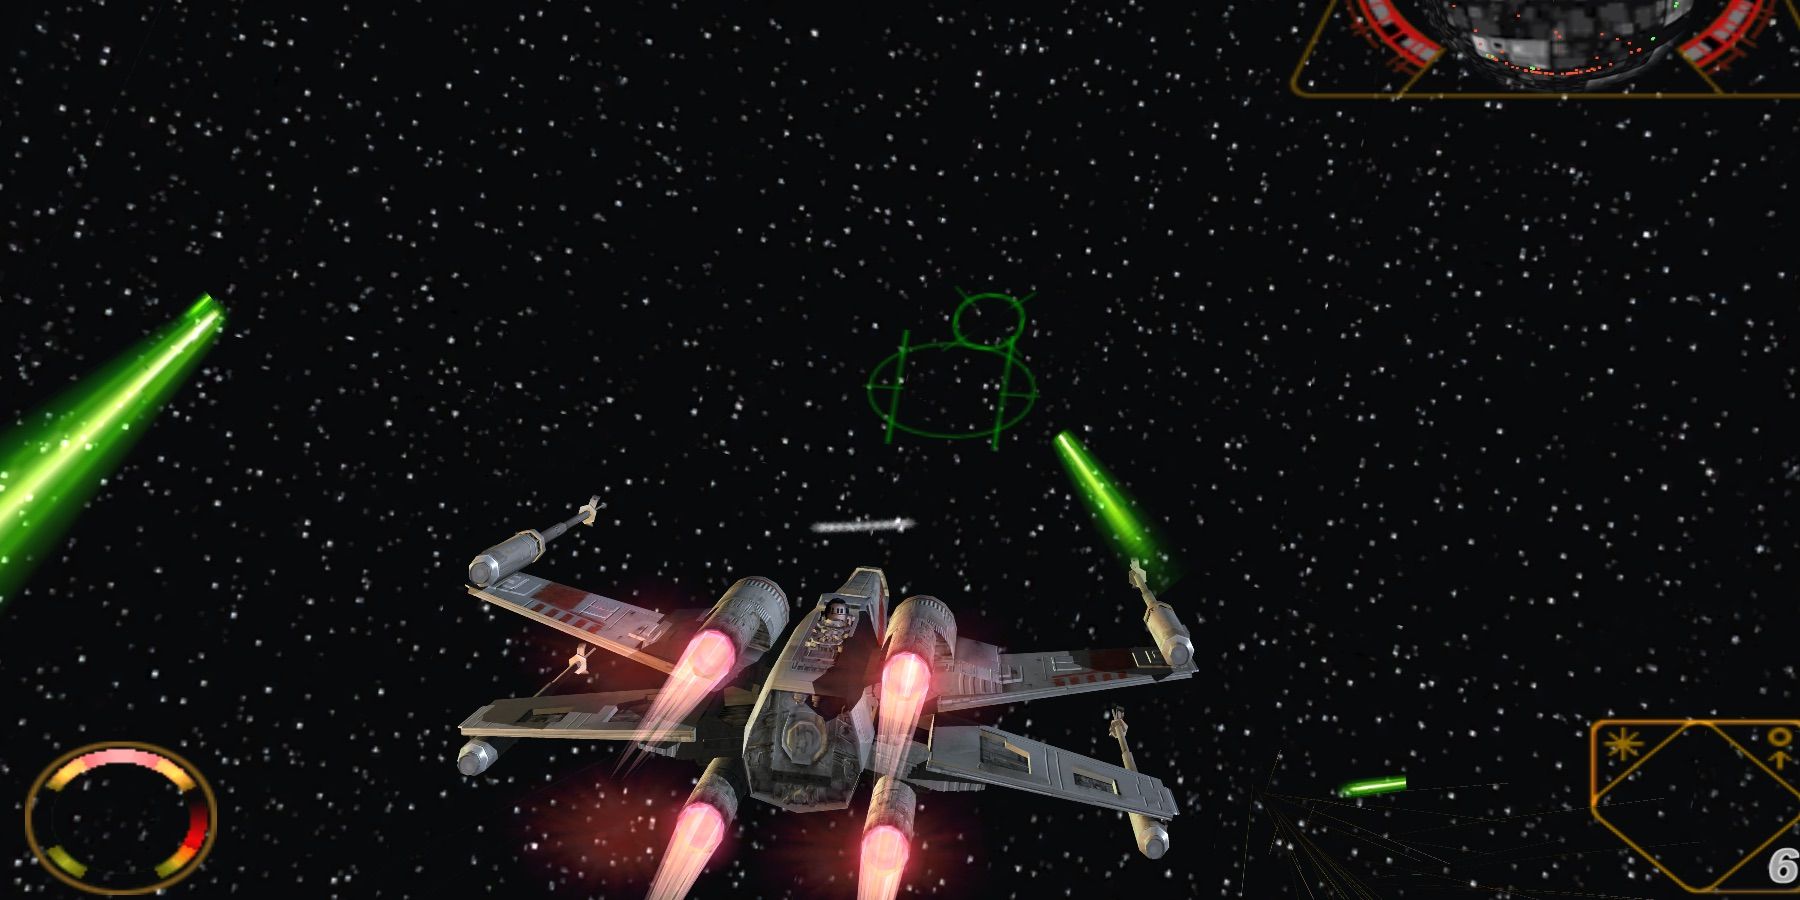 Gameplay from Star Wars Rogue Squadron 2 Rogue Leader